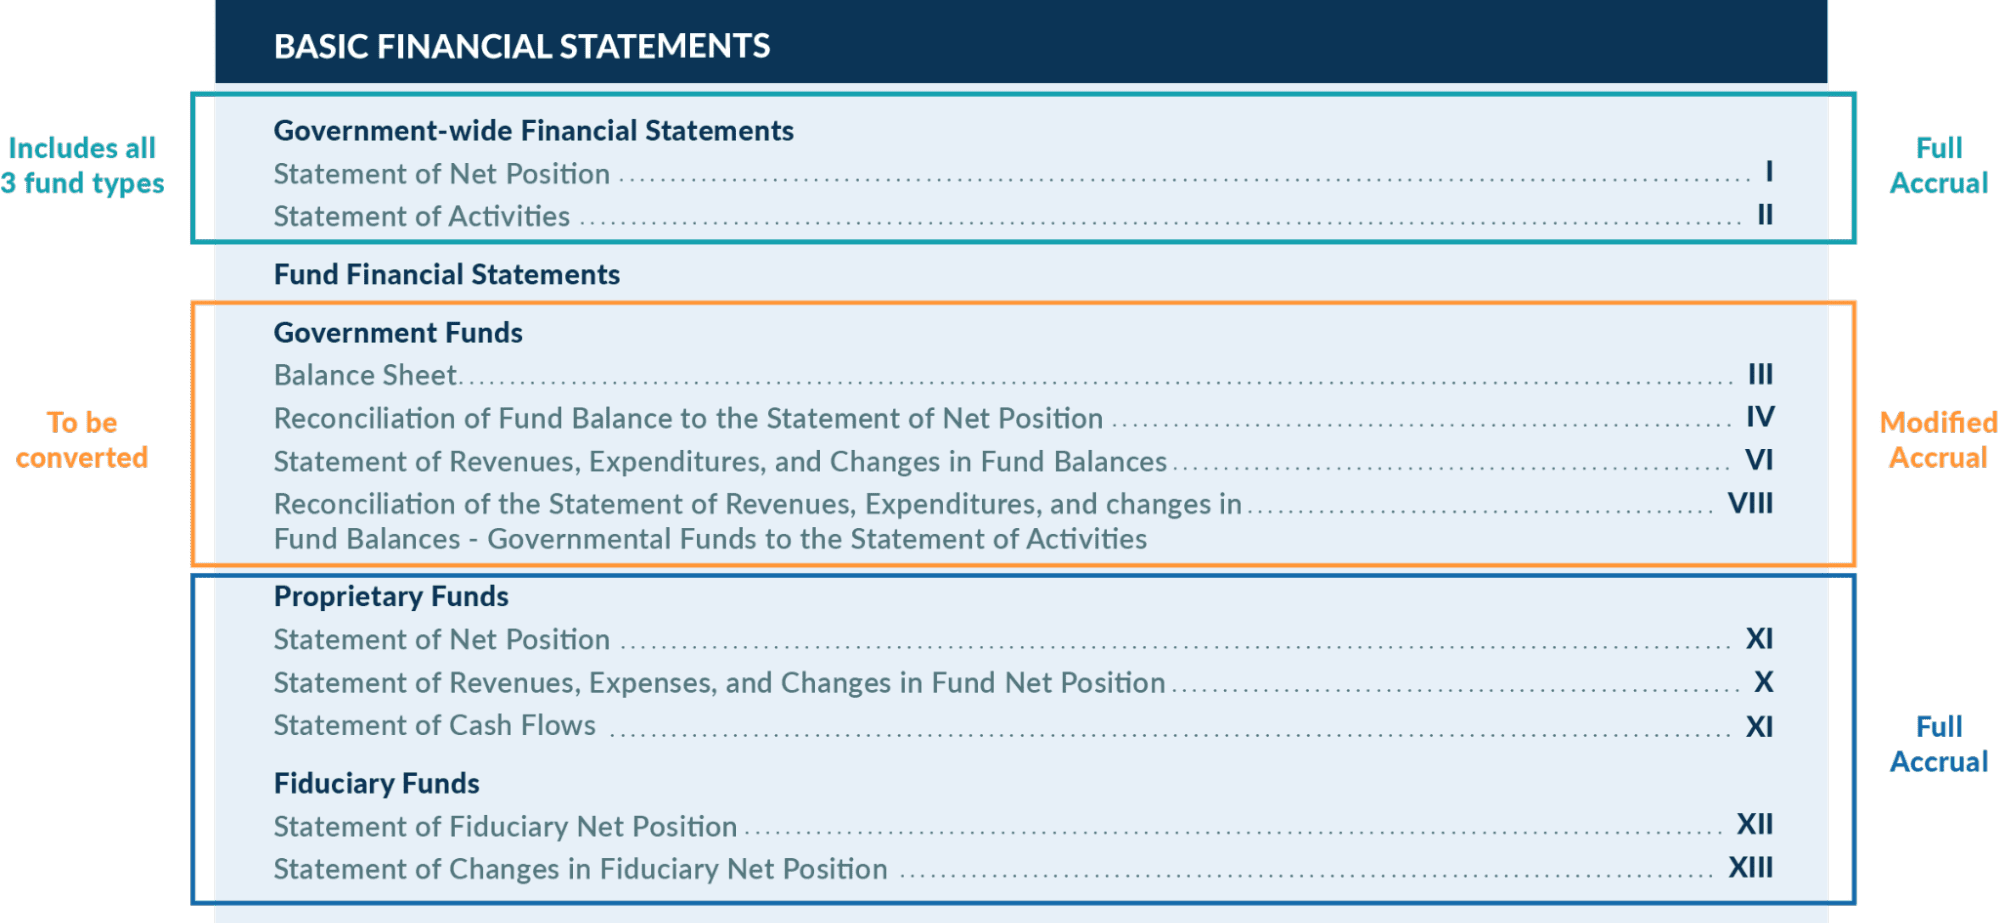 Examples of Basic Financial Statements from ACFR